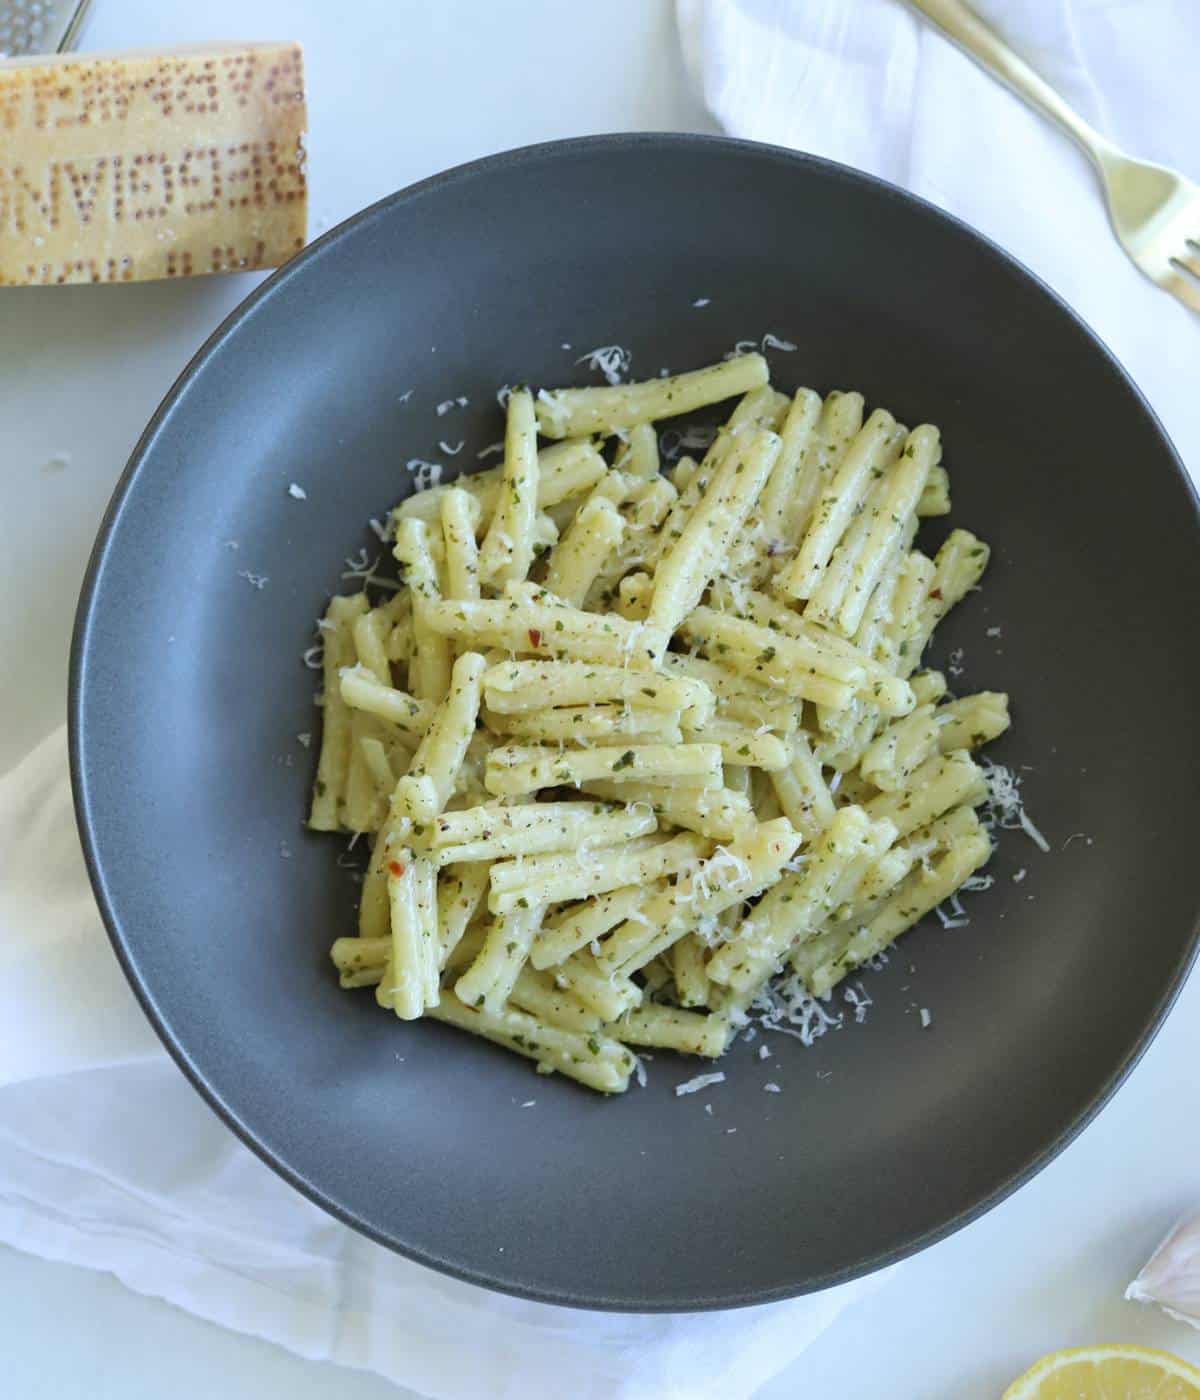 Pesto pasta in gray bowl topped with parmesan cheese.